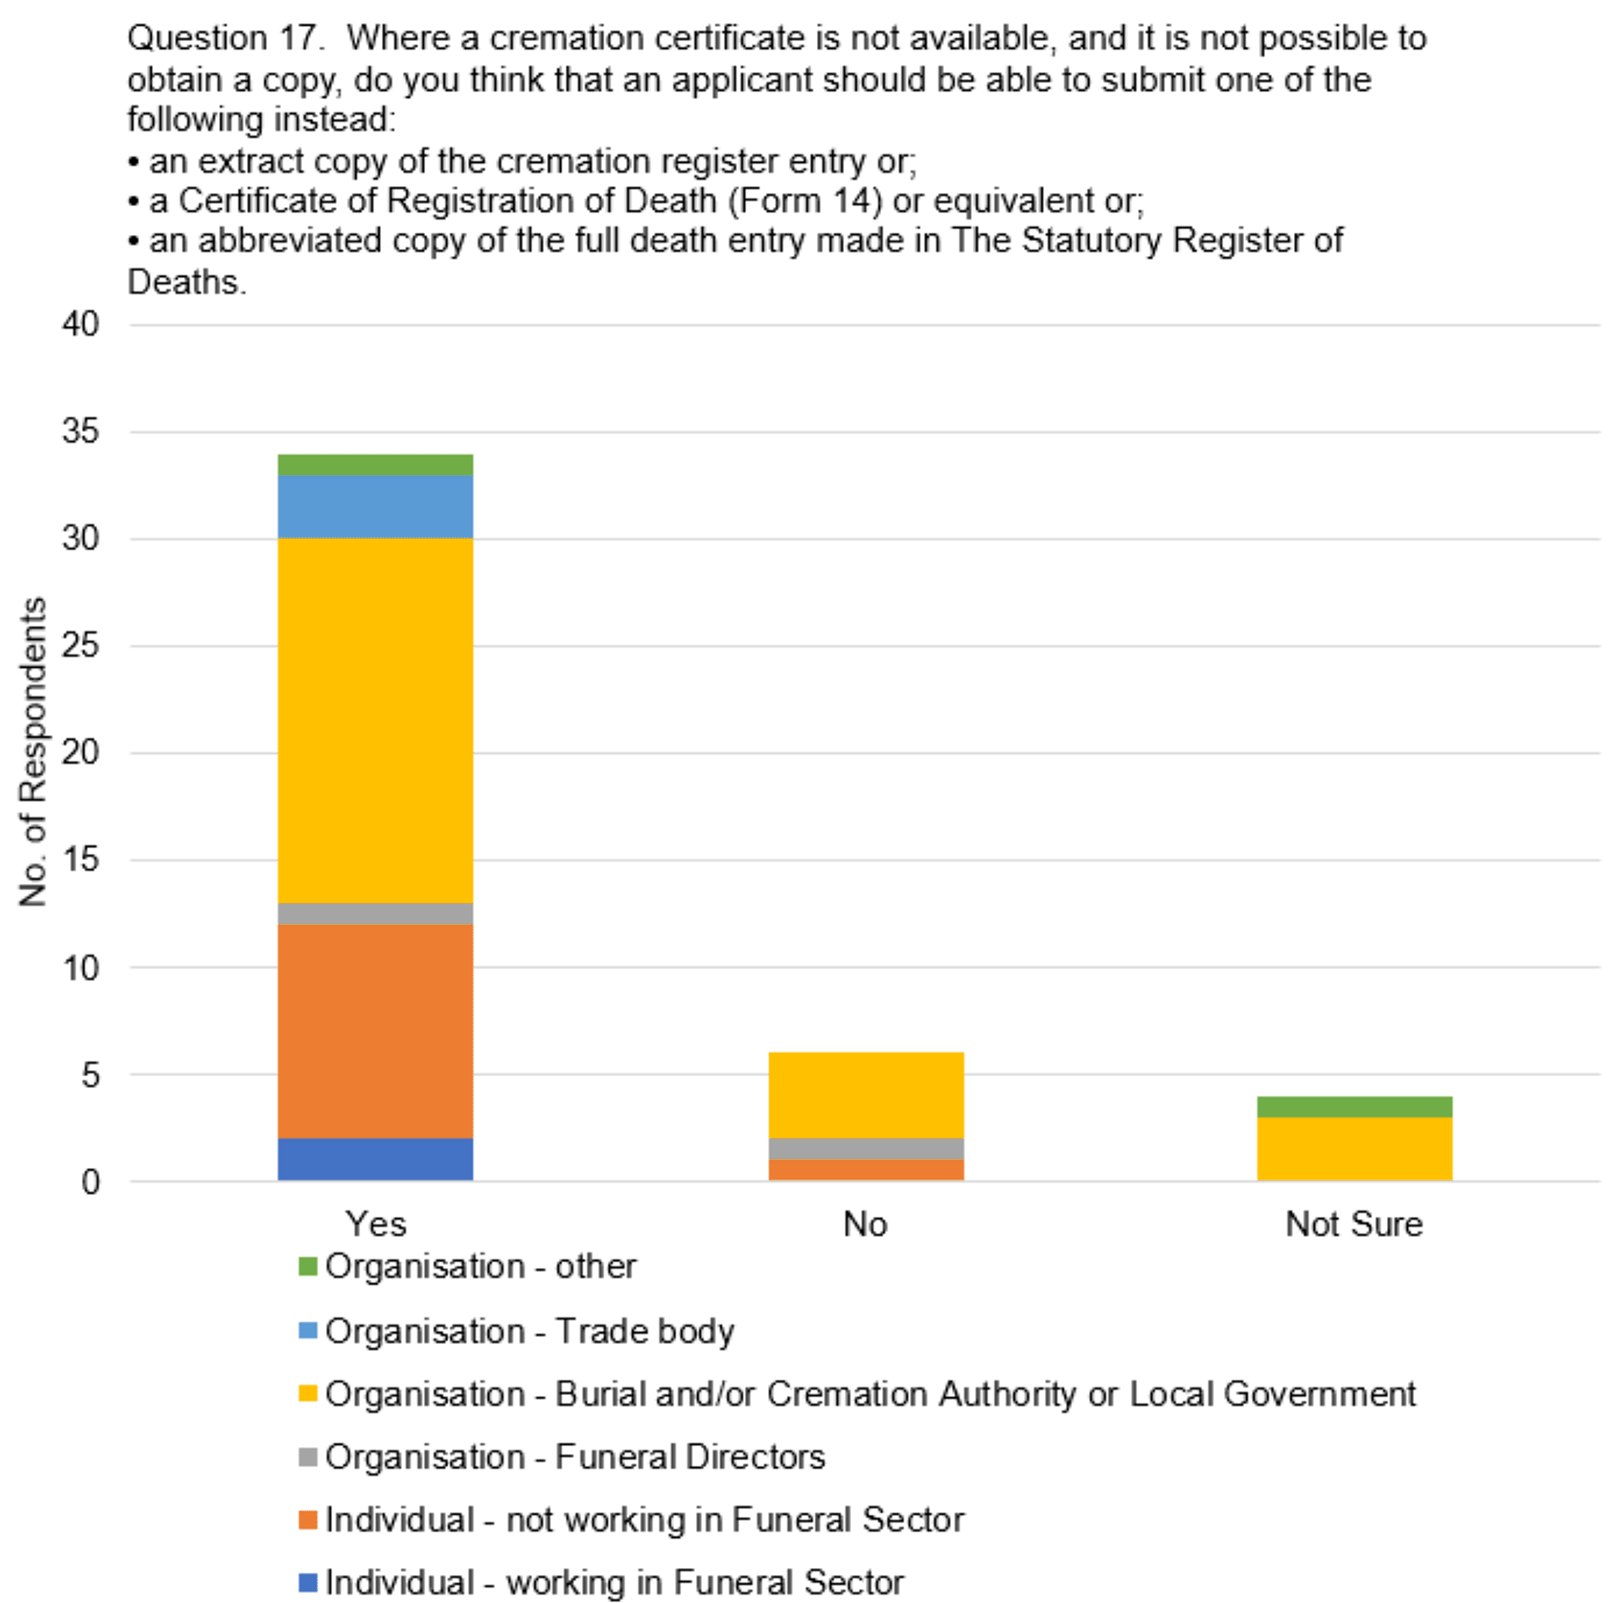 The graph visually presents the data from table 12, focussing on the responses to the question, "Where a cremation certificate is not available, and it is not possible to obtain a copy, do you think that an applicant should be able to submit one of the following instead (para 56 - 57): • an extract copy of the cremation register entry or; • a Certificate of Registration of Death (Form 14) or equivalent or; • an abbreviated copy of the full death entry made in The Statutory Register of Deaths."